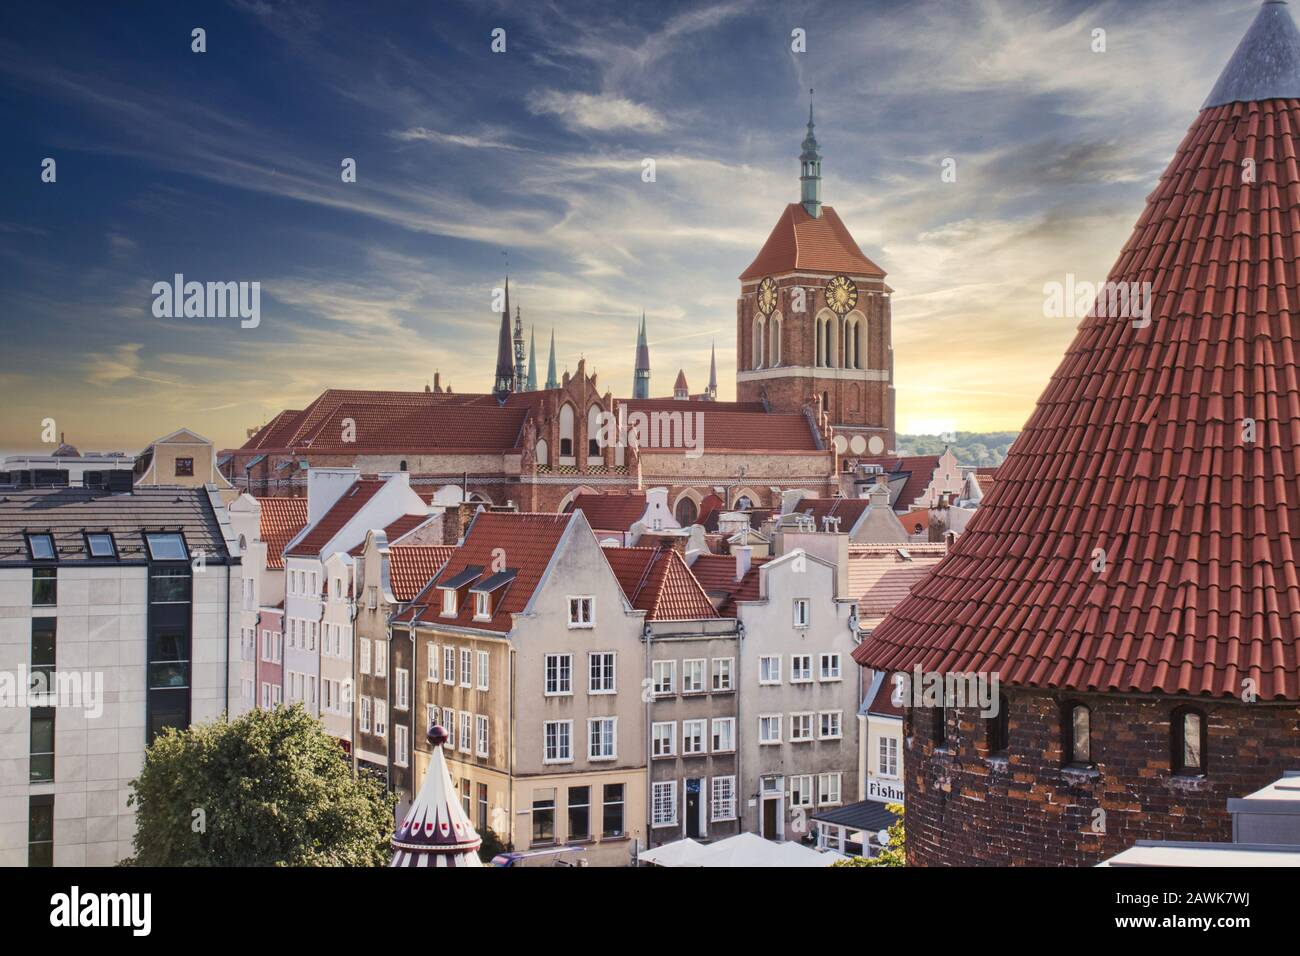 Aerial view of Gdansk city center with church clock tower in the distance Stock Photo